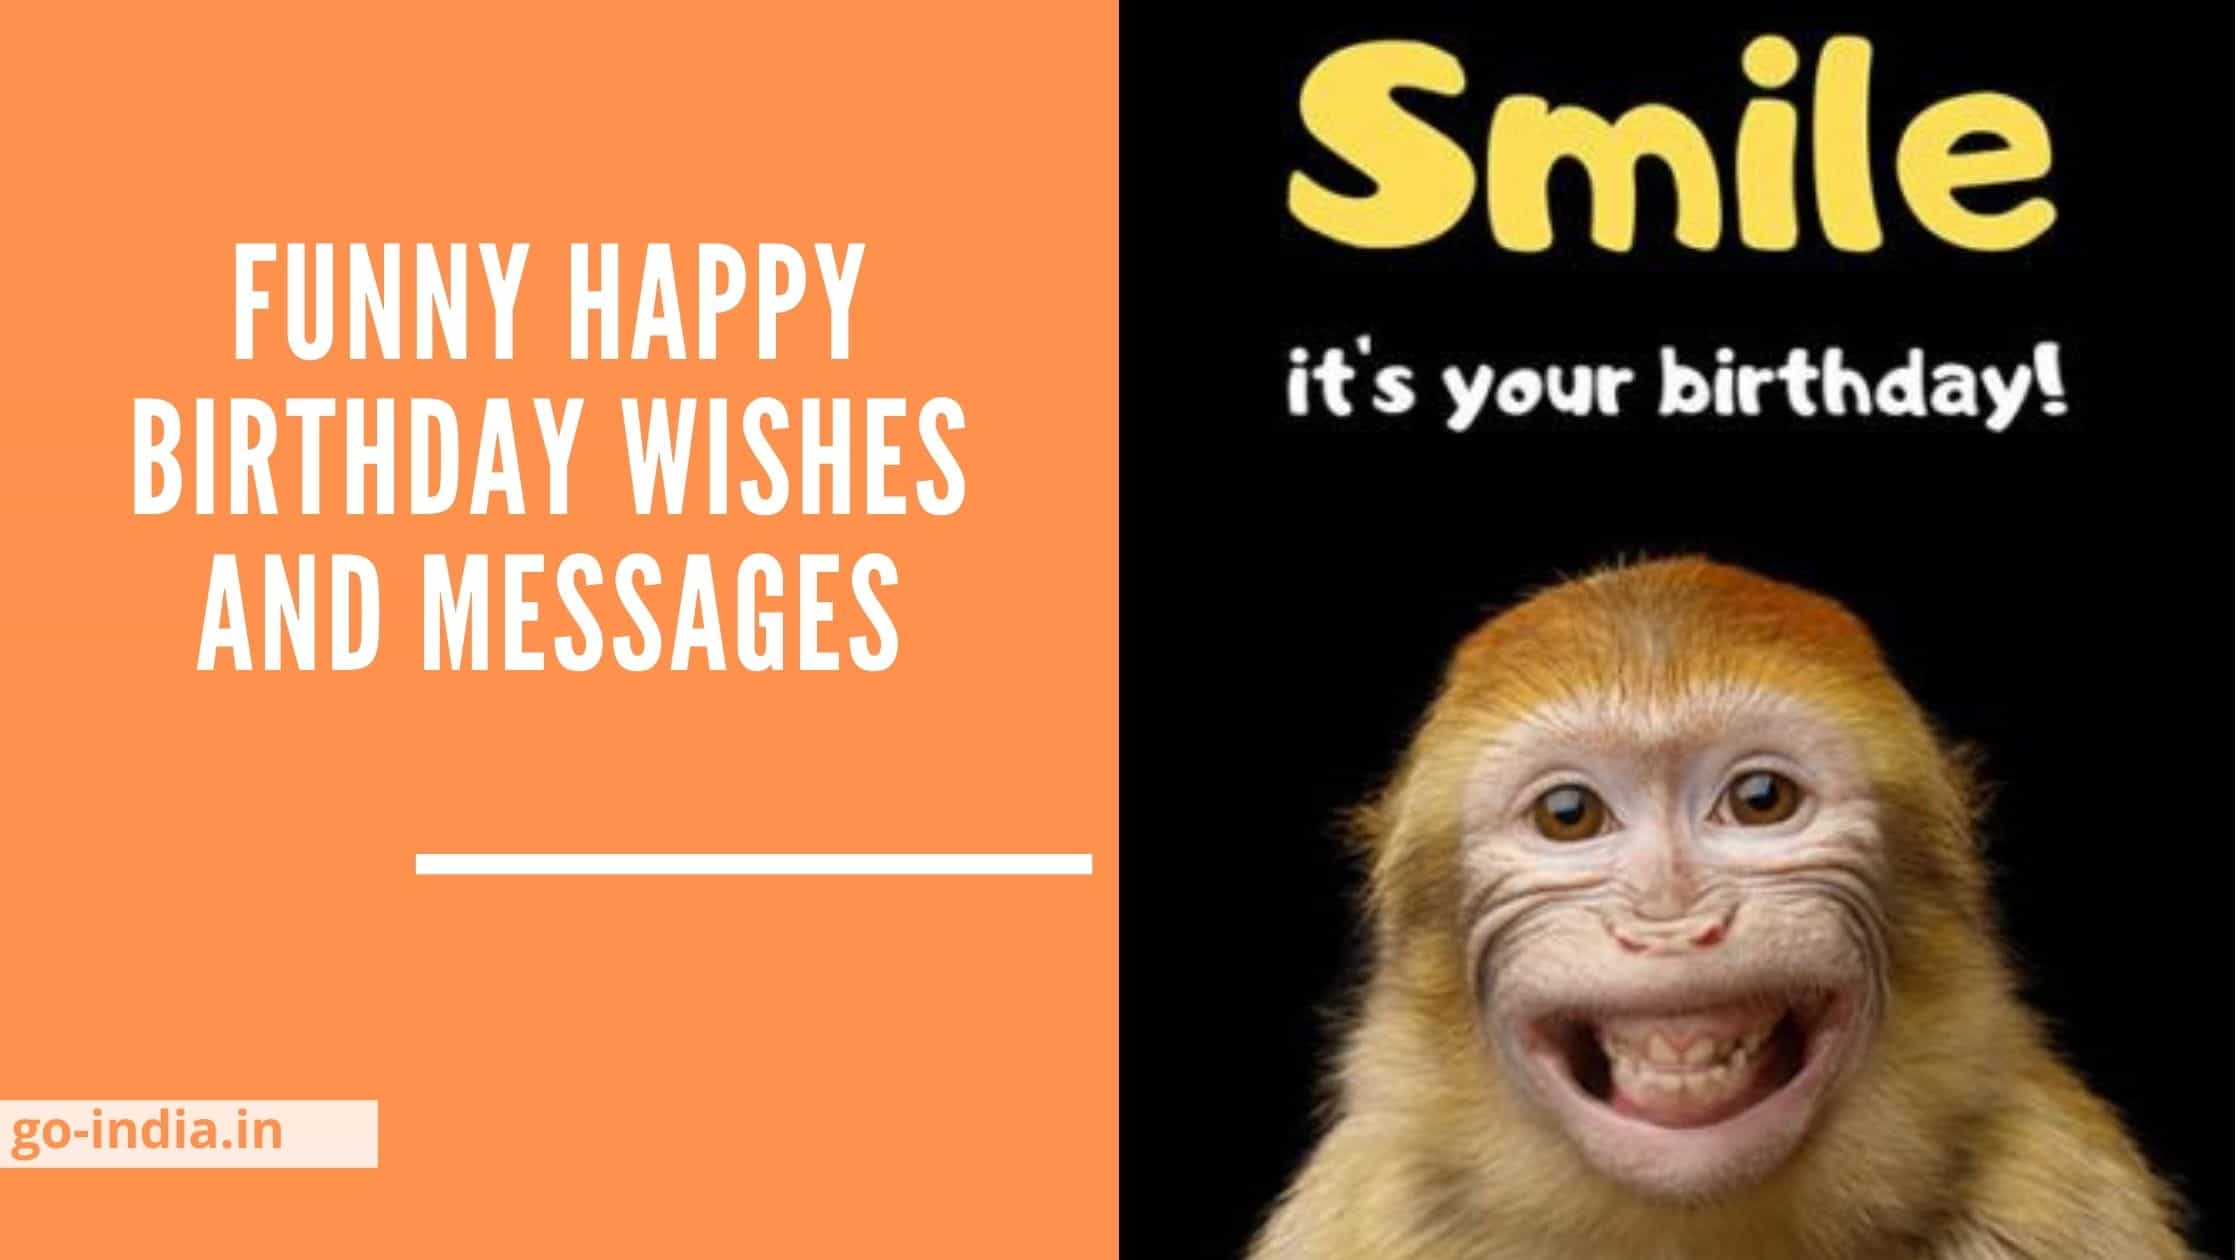 Funny Happy Birthday Wishes and Messages ! 50 funny Wishes to Make